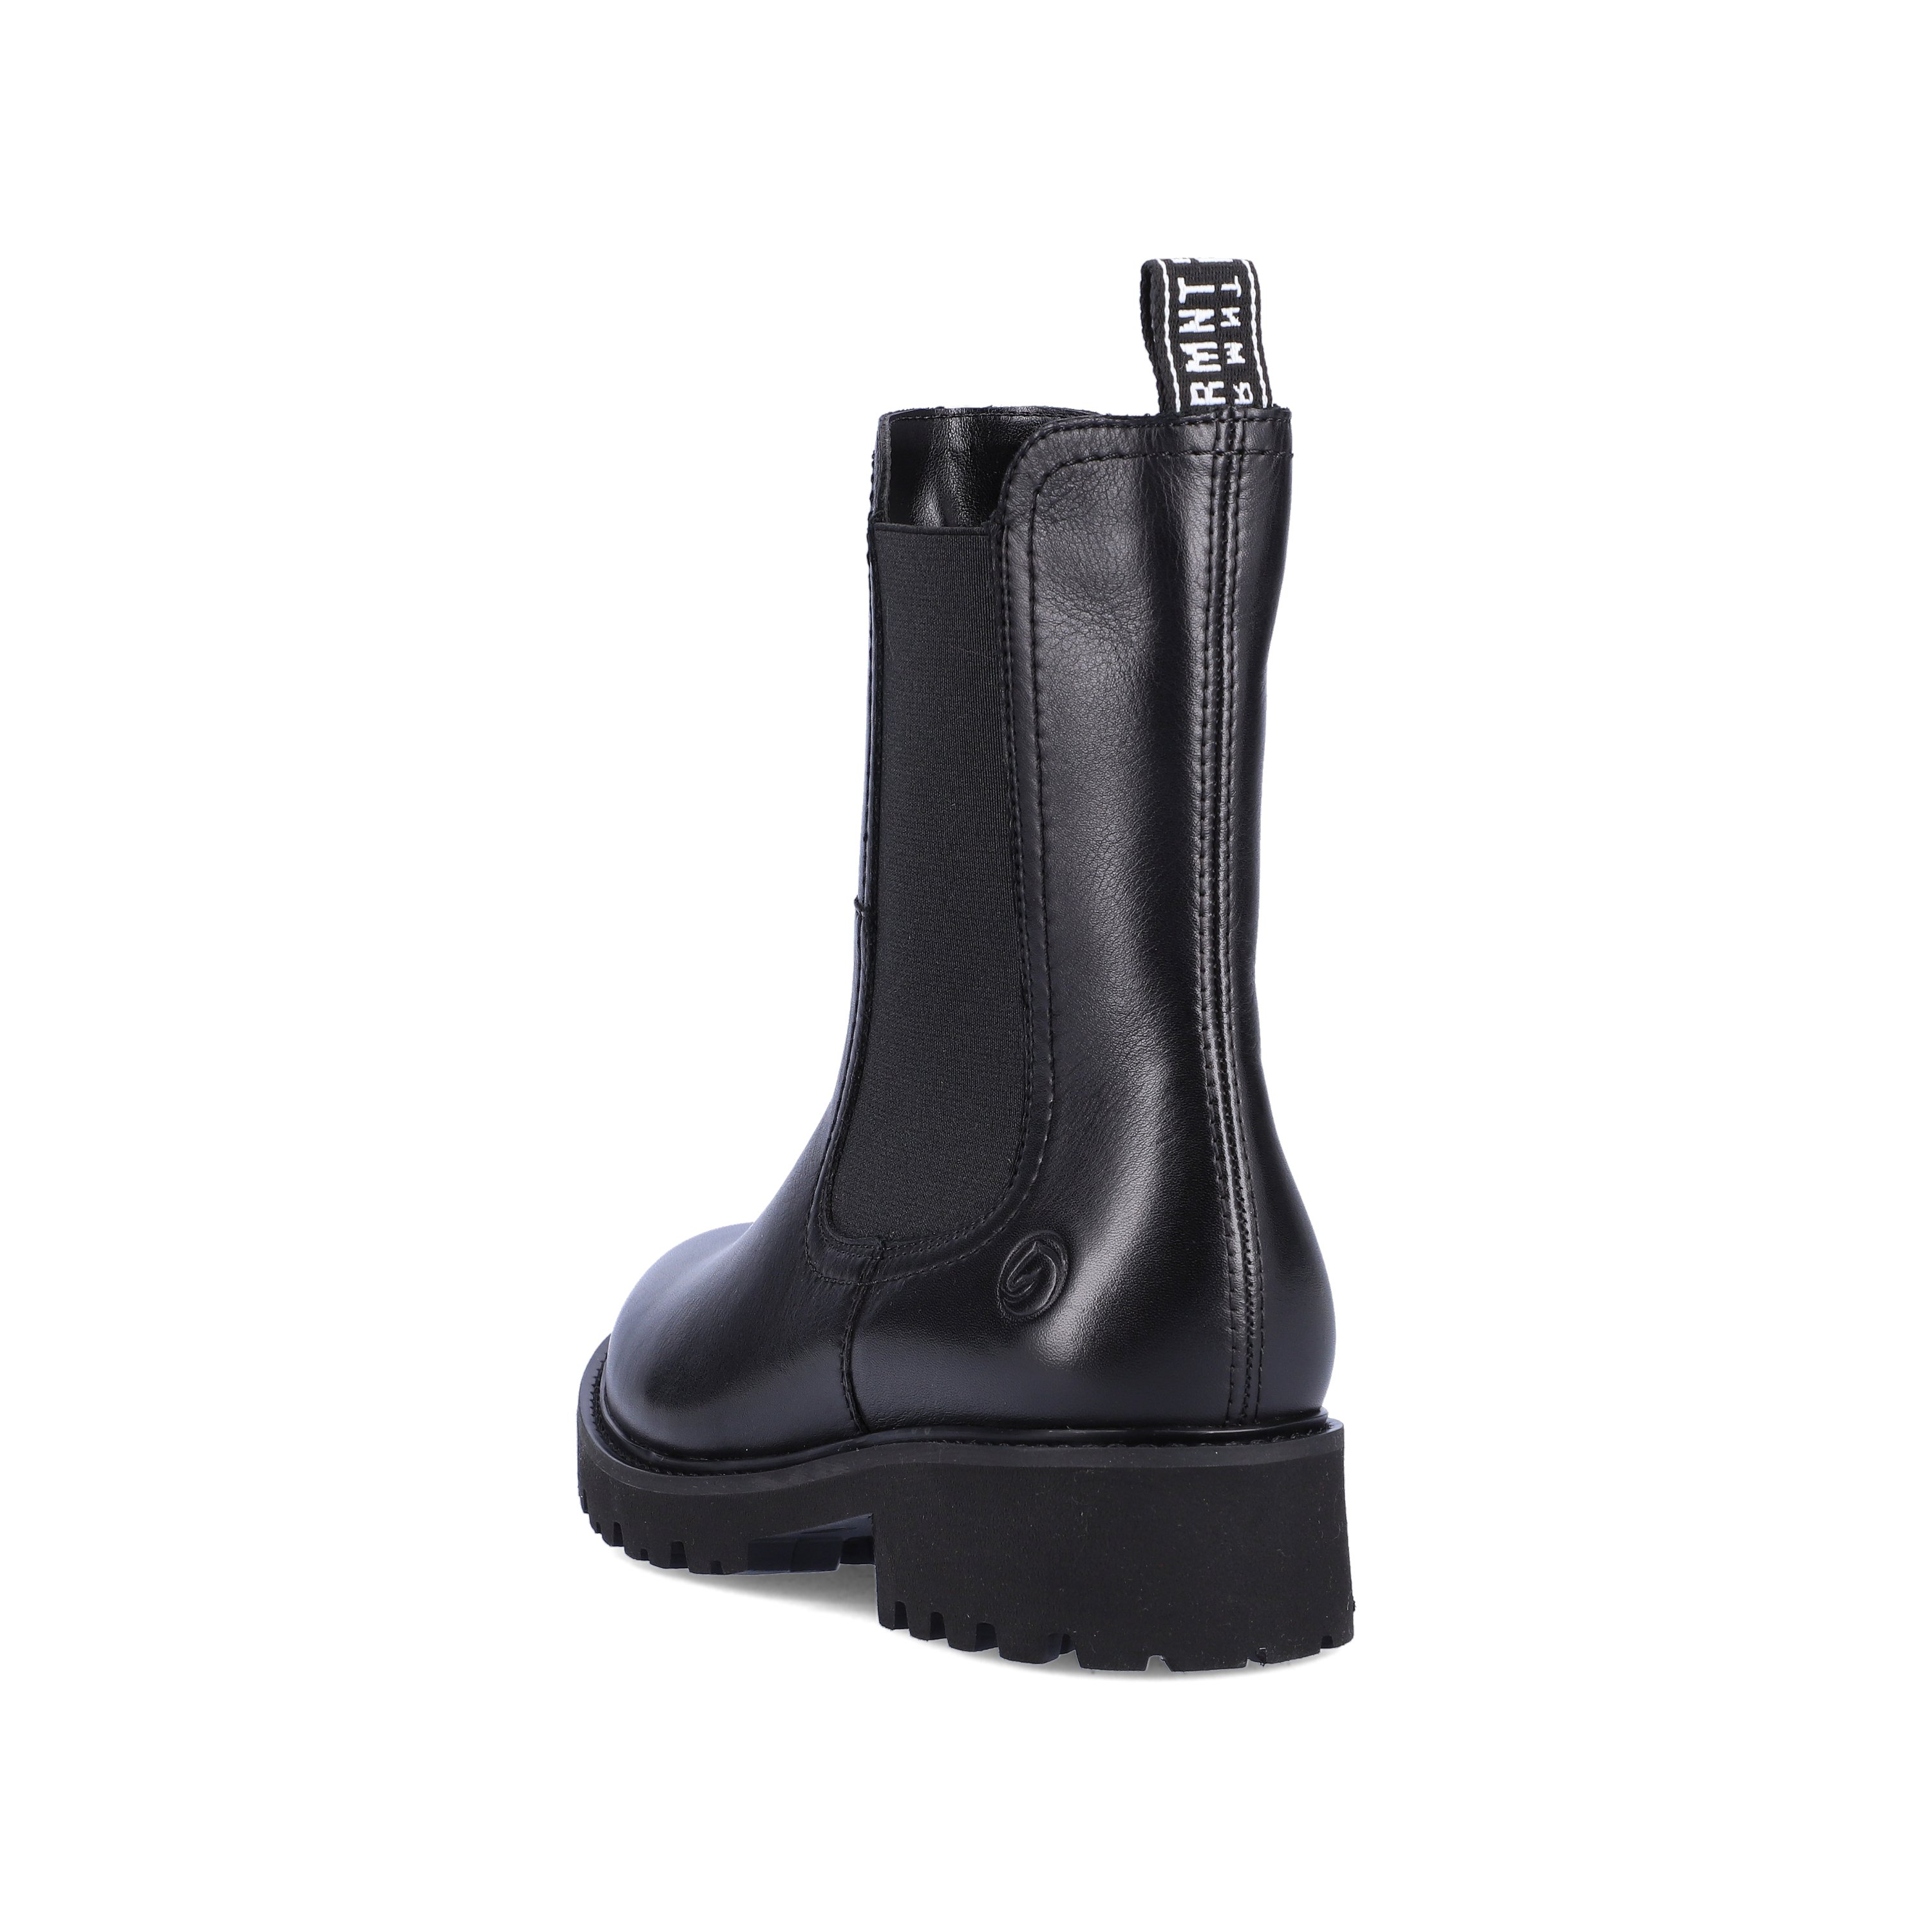 Graphite black remonte women´s Chelsea boots D8694-00 with cushioning sole. Shoe from the back